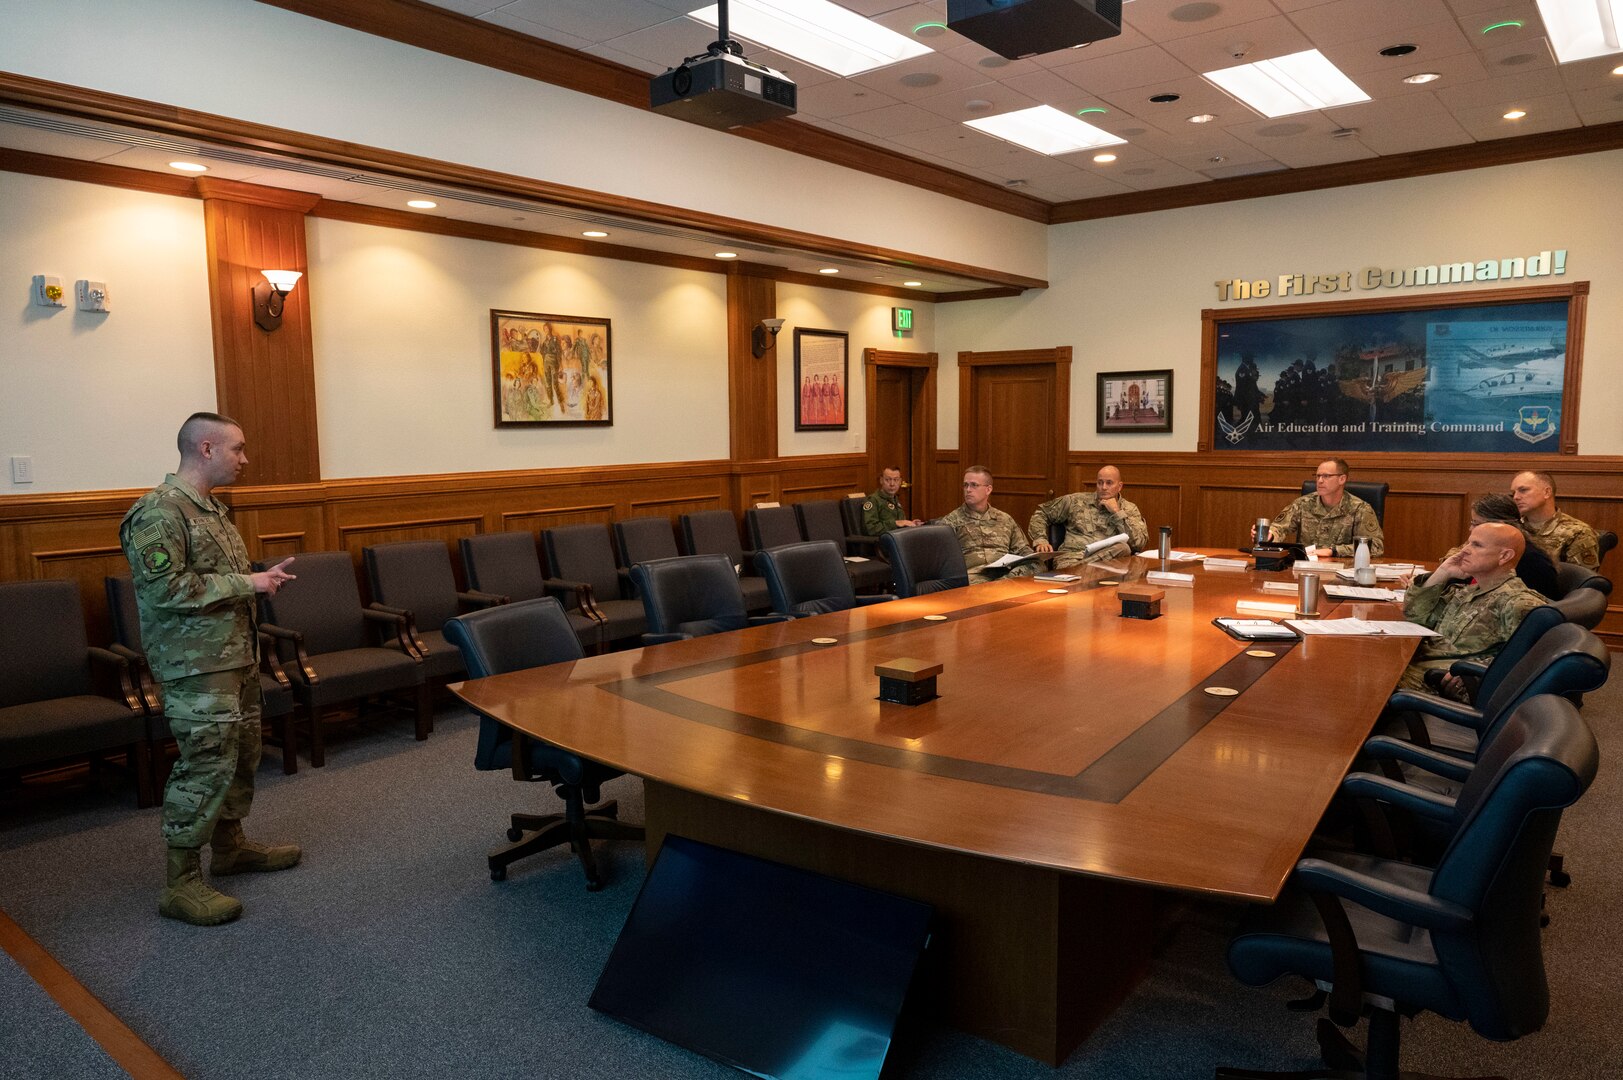 U.S. Air Force Senior Master Sgt. Errick Wernecke, Air Force Safety Center superintendent of nuclear missile systems, pitches a Spark Tank submission to Air Education and Training Command leaders during the 2023 AETC Spark Tank selection panel at Joint Base San Antonio-Randolph, Texas, Oct. 19, 2022